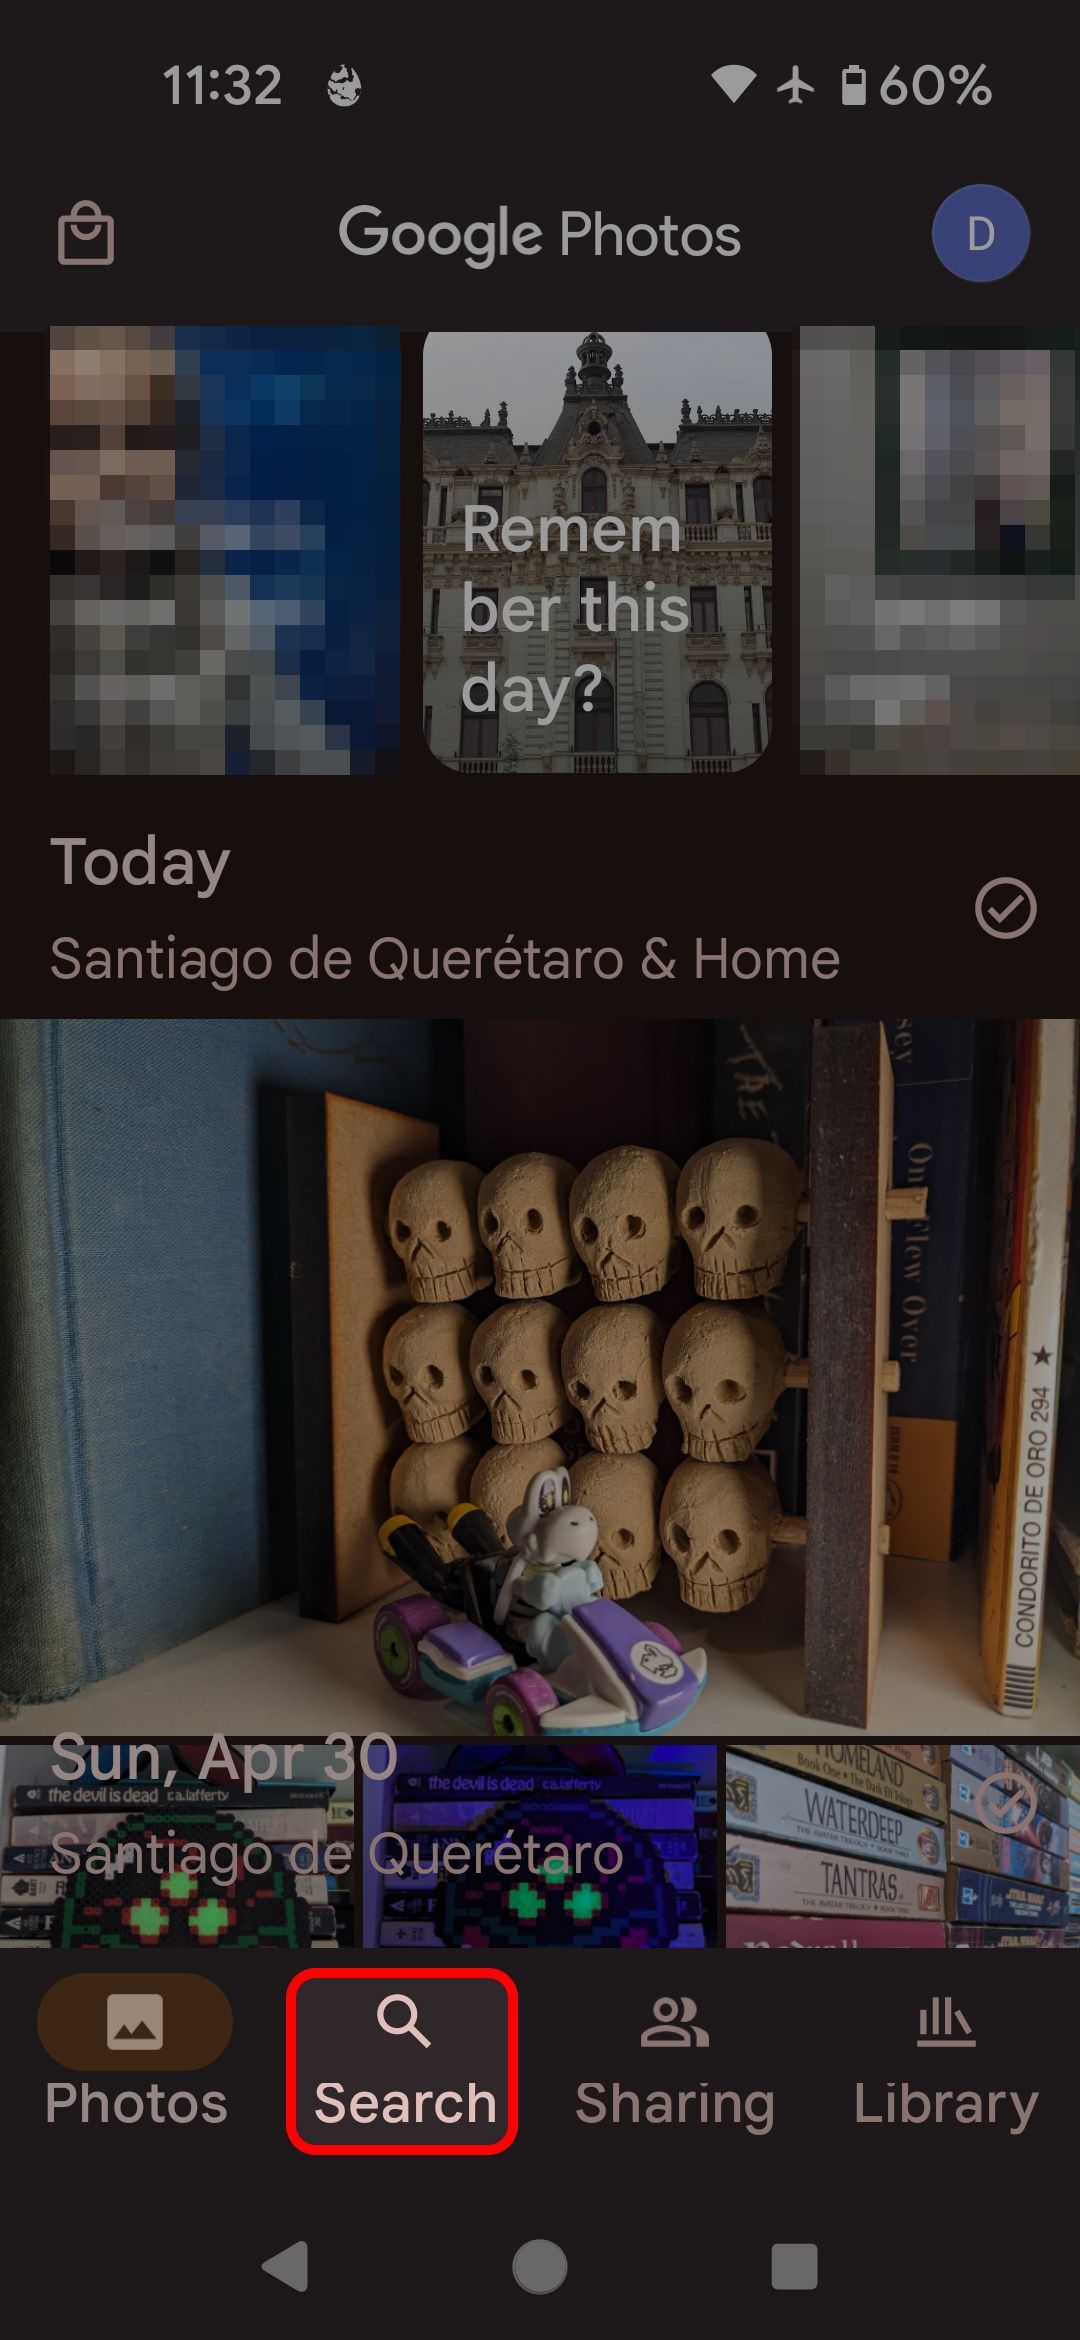 Tapping the Search button on the Google Photos app